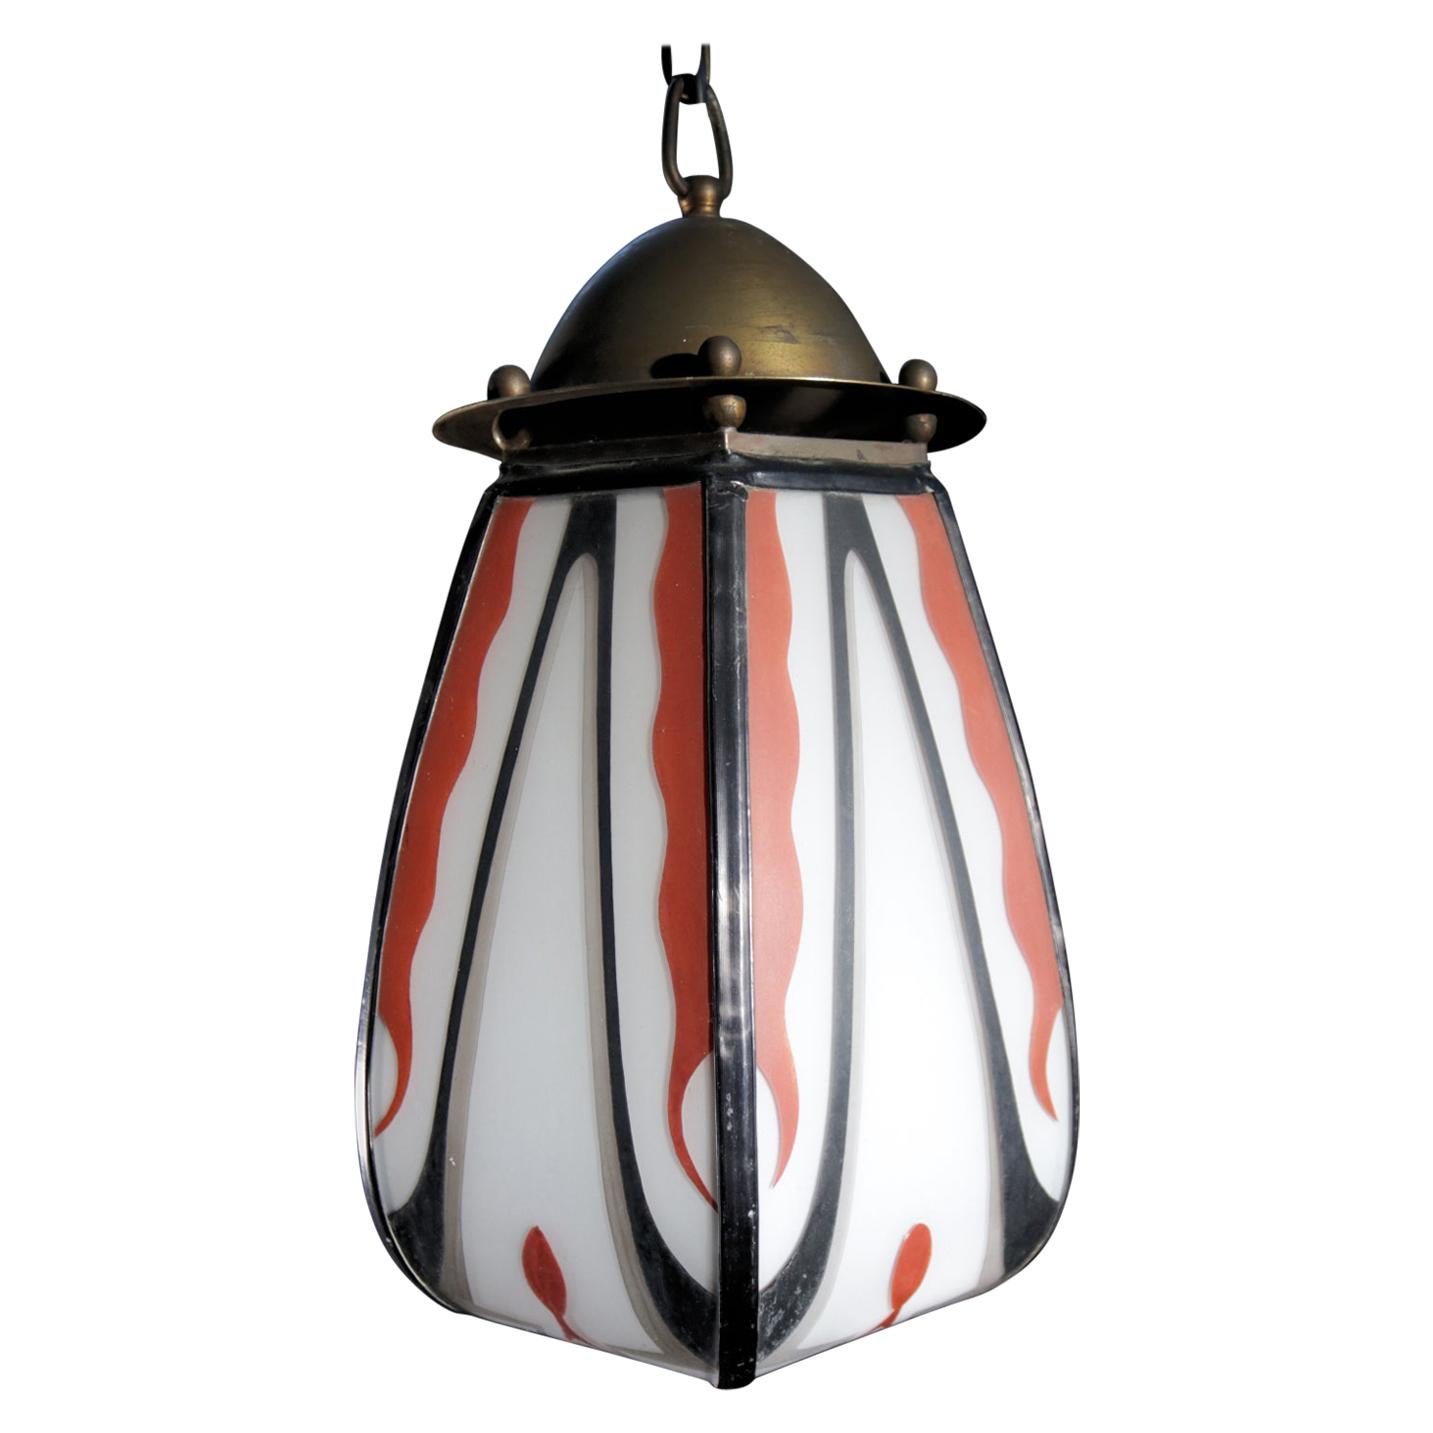 Dutch Art Deco Amsterdam School "De Nieuwe Honsel" Stained Glass Hanging  Lamp For Sale at 1stDibs